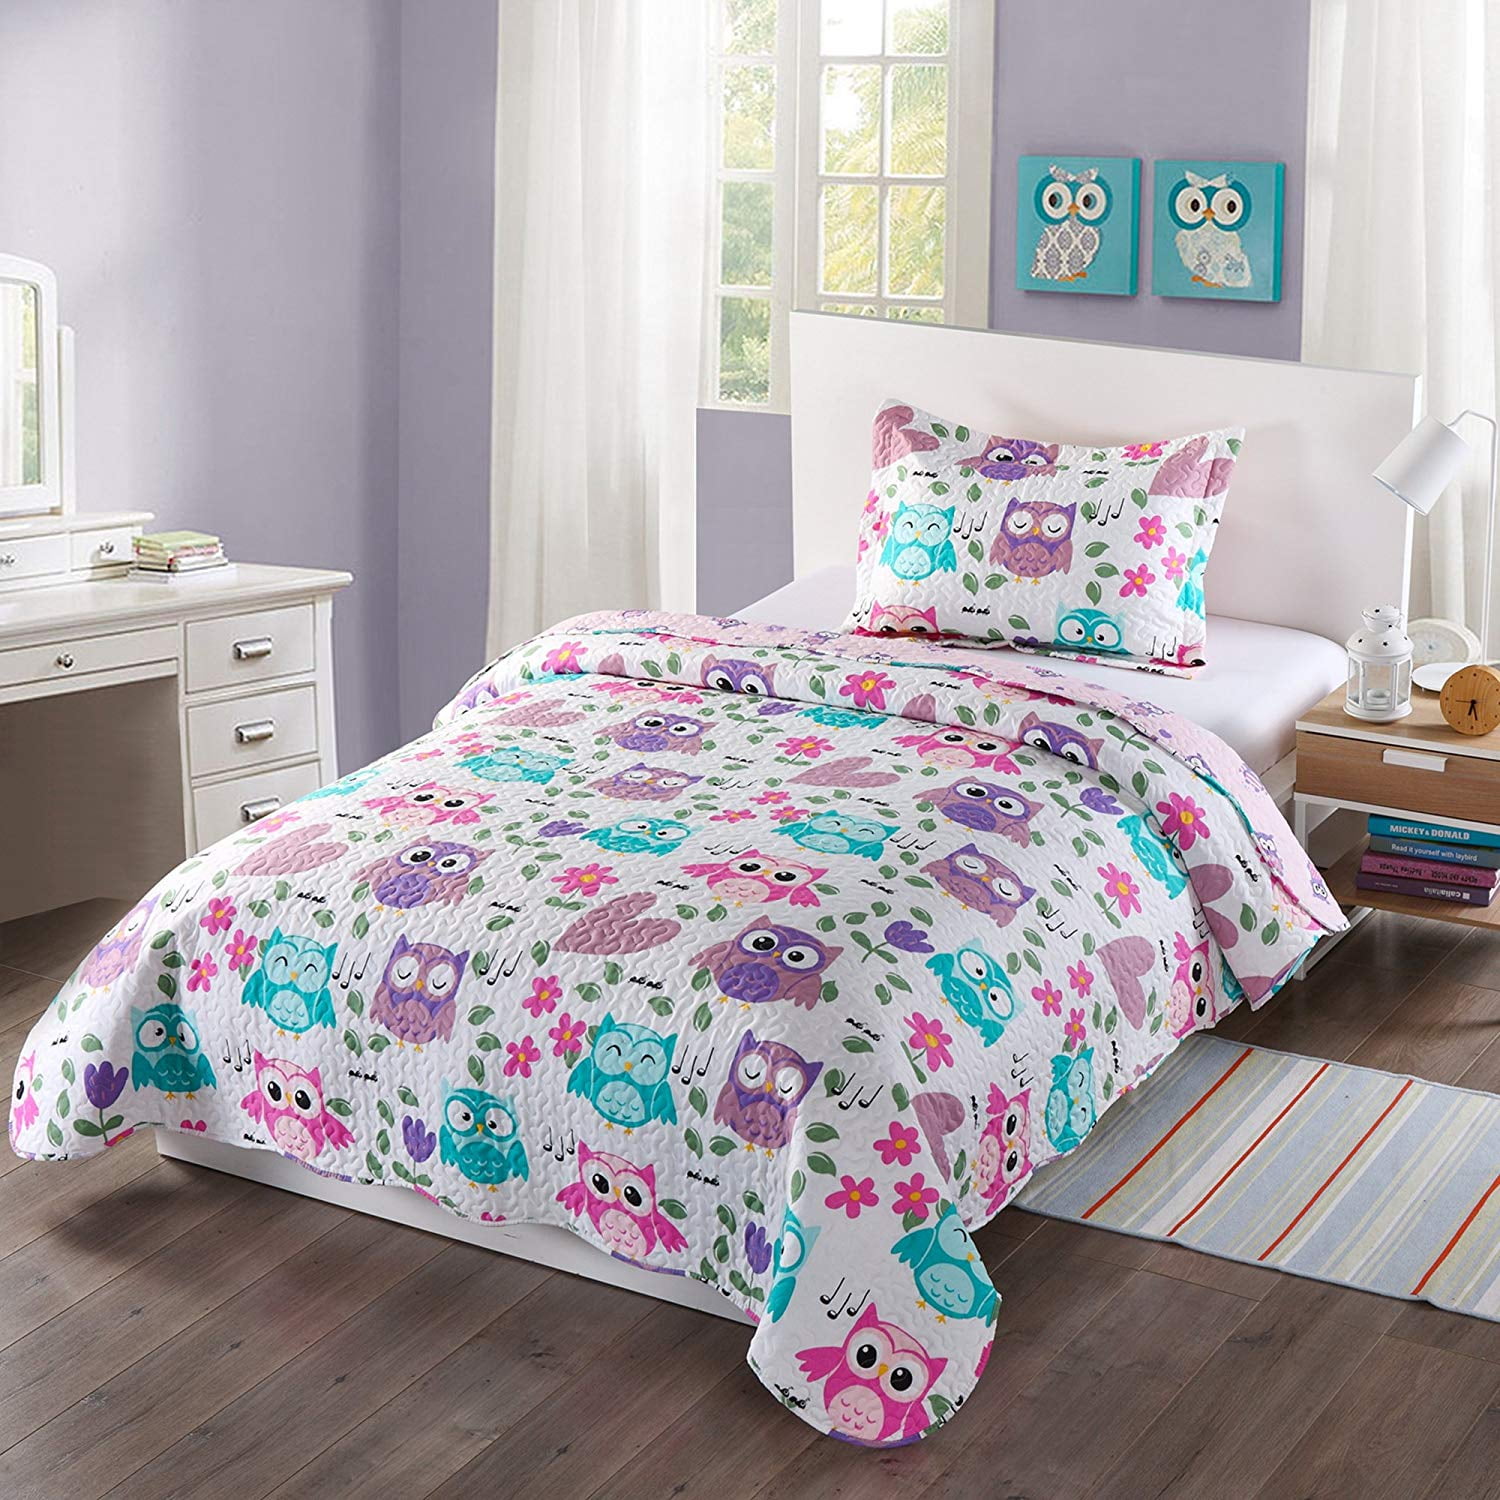 MarCielo 2 Piece Kids Bedspread Quilts Set Throw Blanket for Teens Girls Bed Printed Bedding Coverlet ocean home fashion twin size quilt purple floral Twin Twin Size Purple Floral Striped